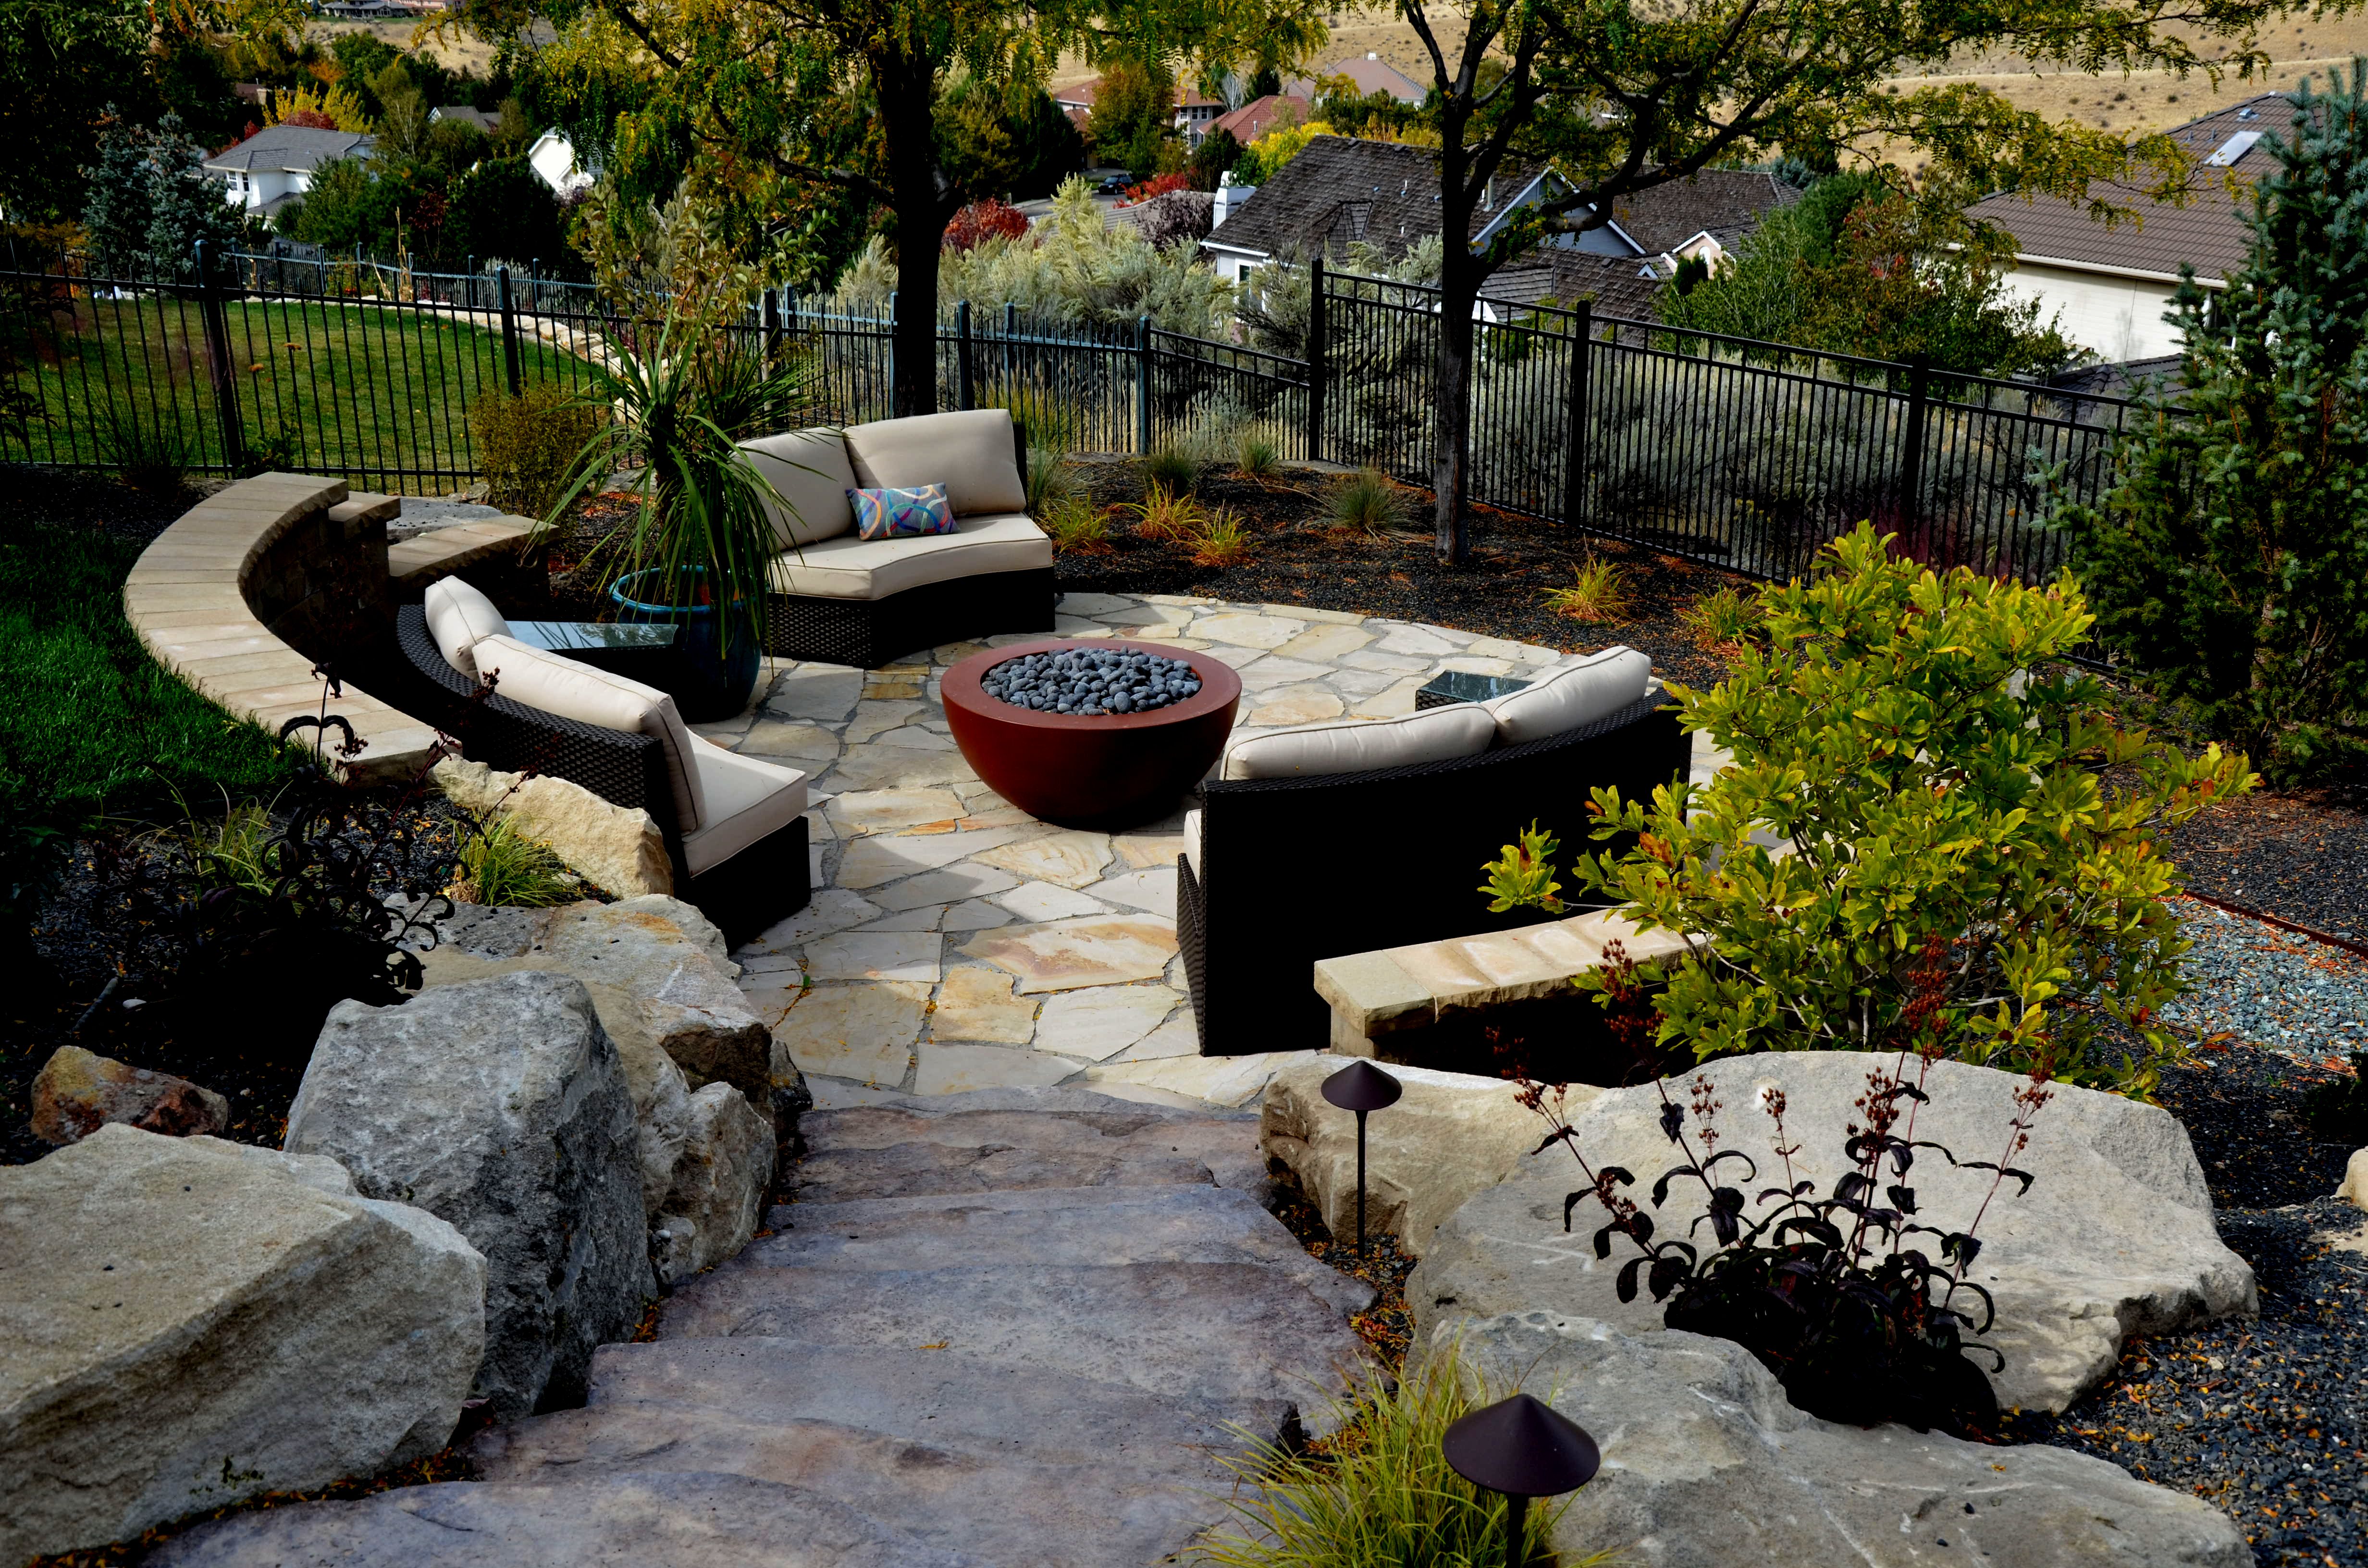 Stone Retaining Wall/Seating Area  | The Garden Artist Boise, ID